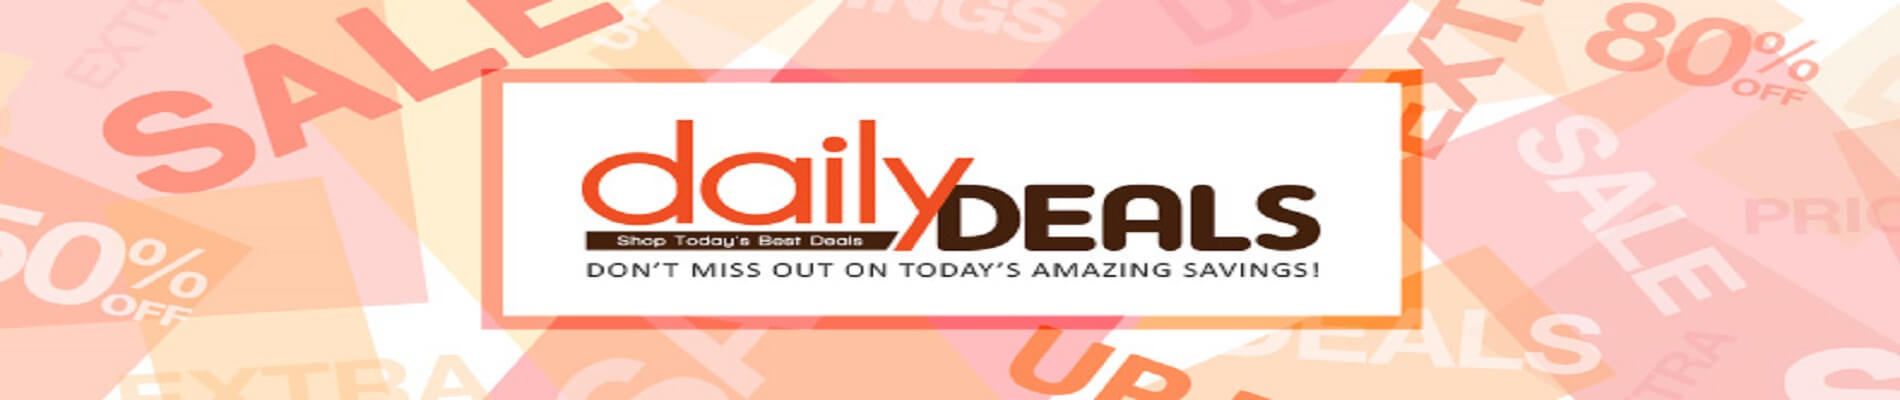 payless daily deals